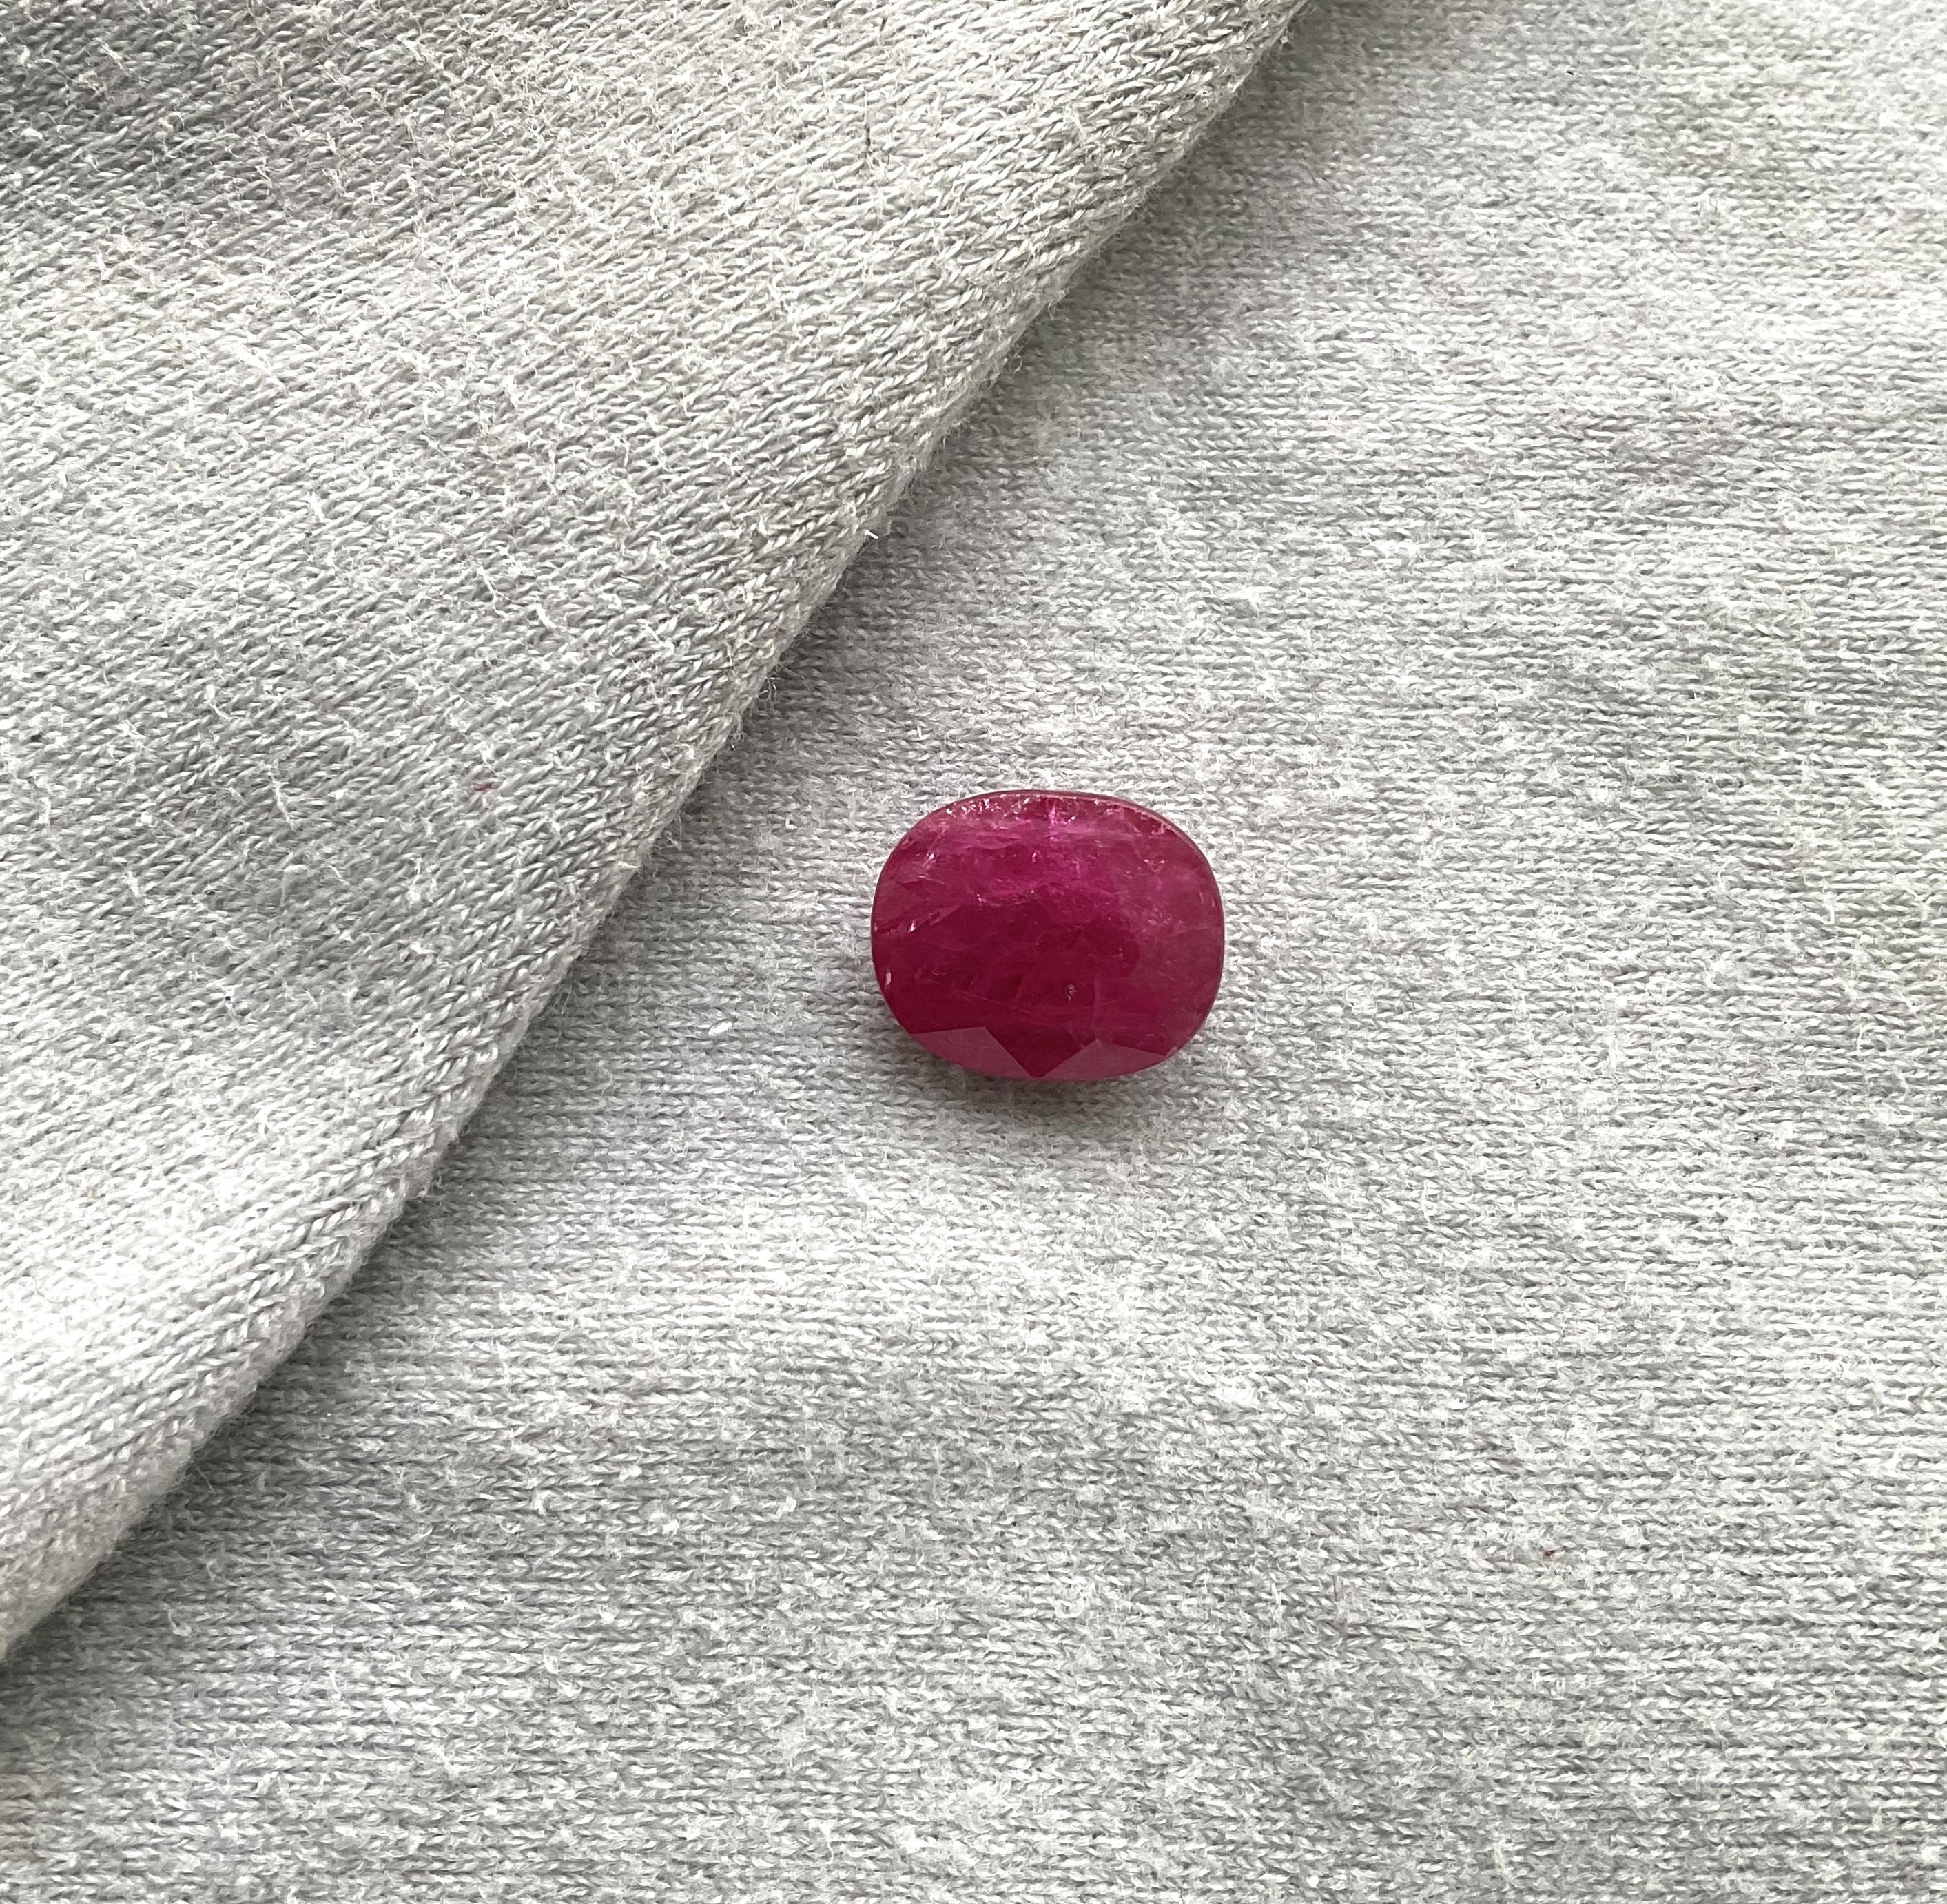 As we are auction partners at Gemfields, we have sourced these rubies from winning auctions and had cut them in our in house manufacturing responsibly.

Weight: 6.51 Carats
Size: 12x10x5.5 MM
Pieces: 1
Shape: Faceted oval Cut stone